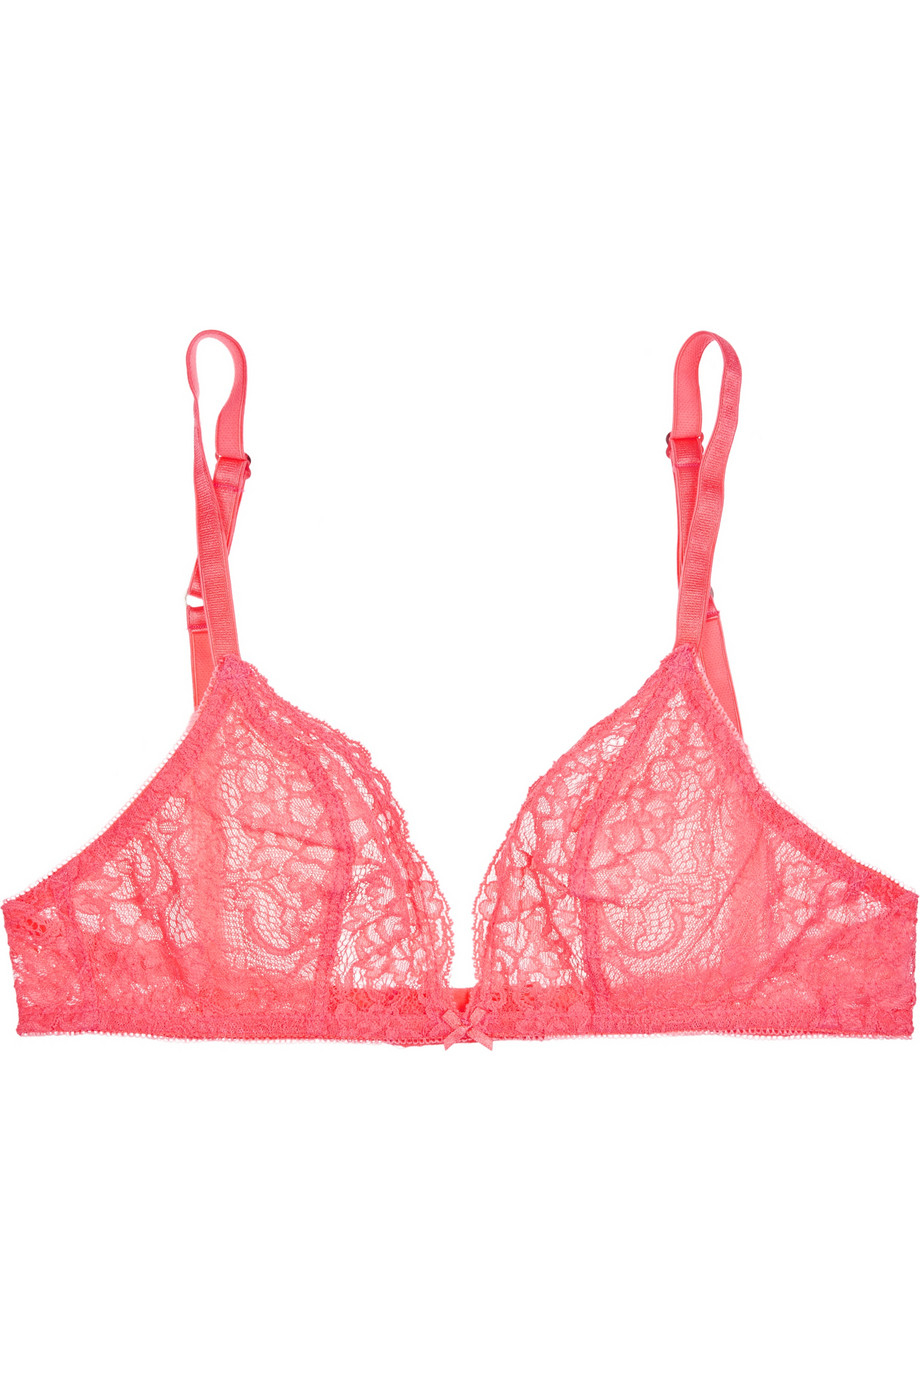 Deborah marquit Lace Soft-Cup Triangle Bra in Pink | Lyst